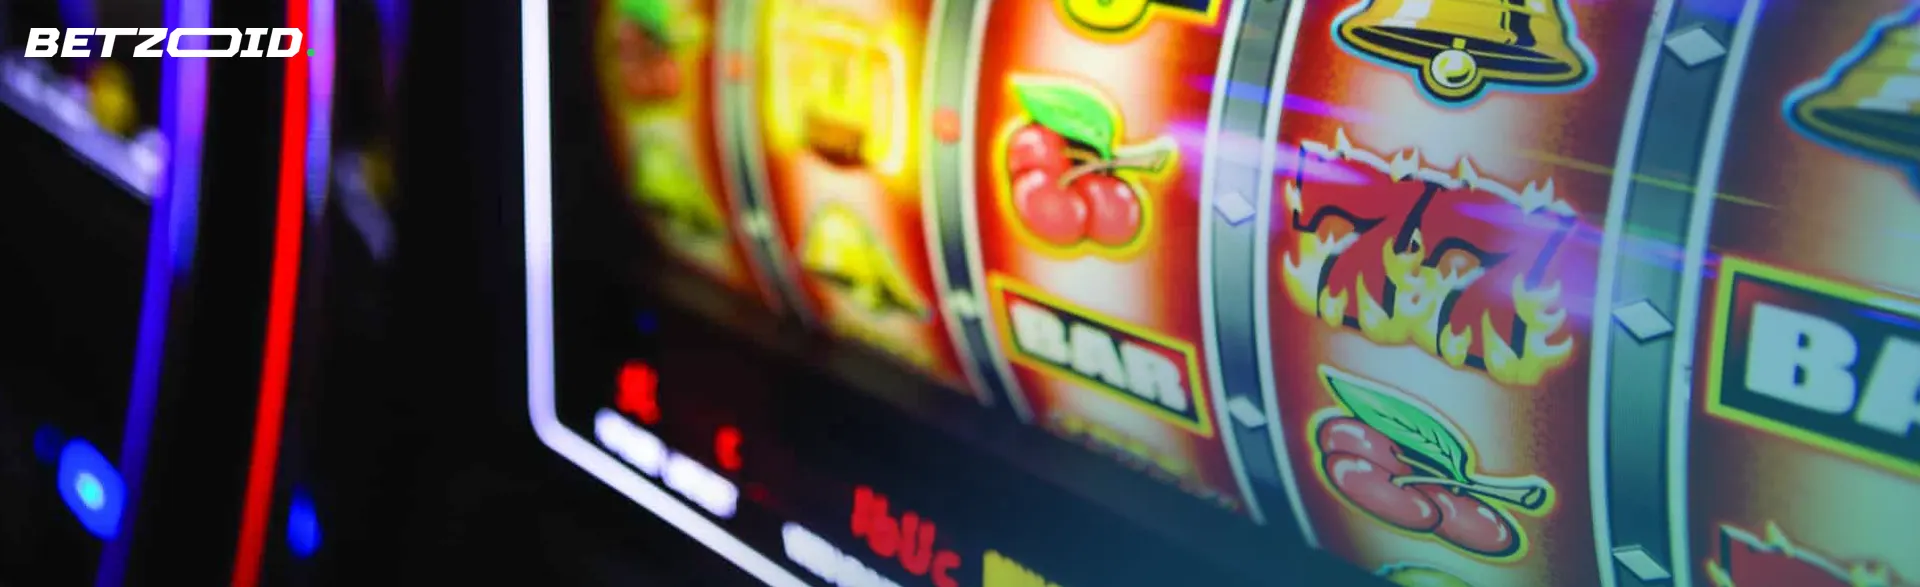 A close-up of a vibrant slot machine screen displaying colorful symbols, typical in free spins casinos.